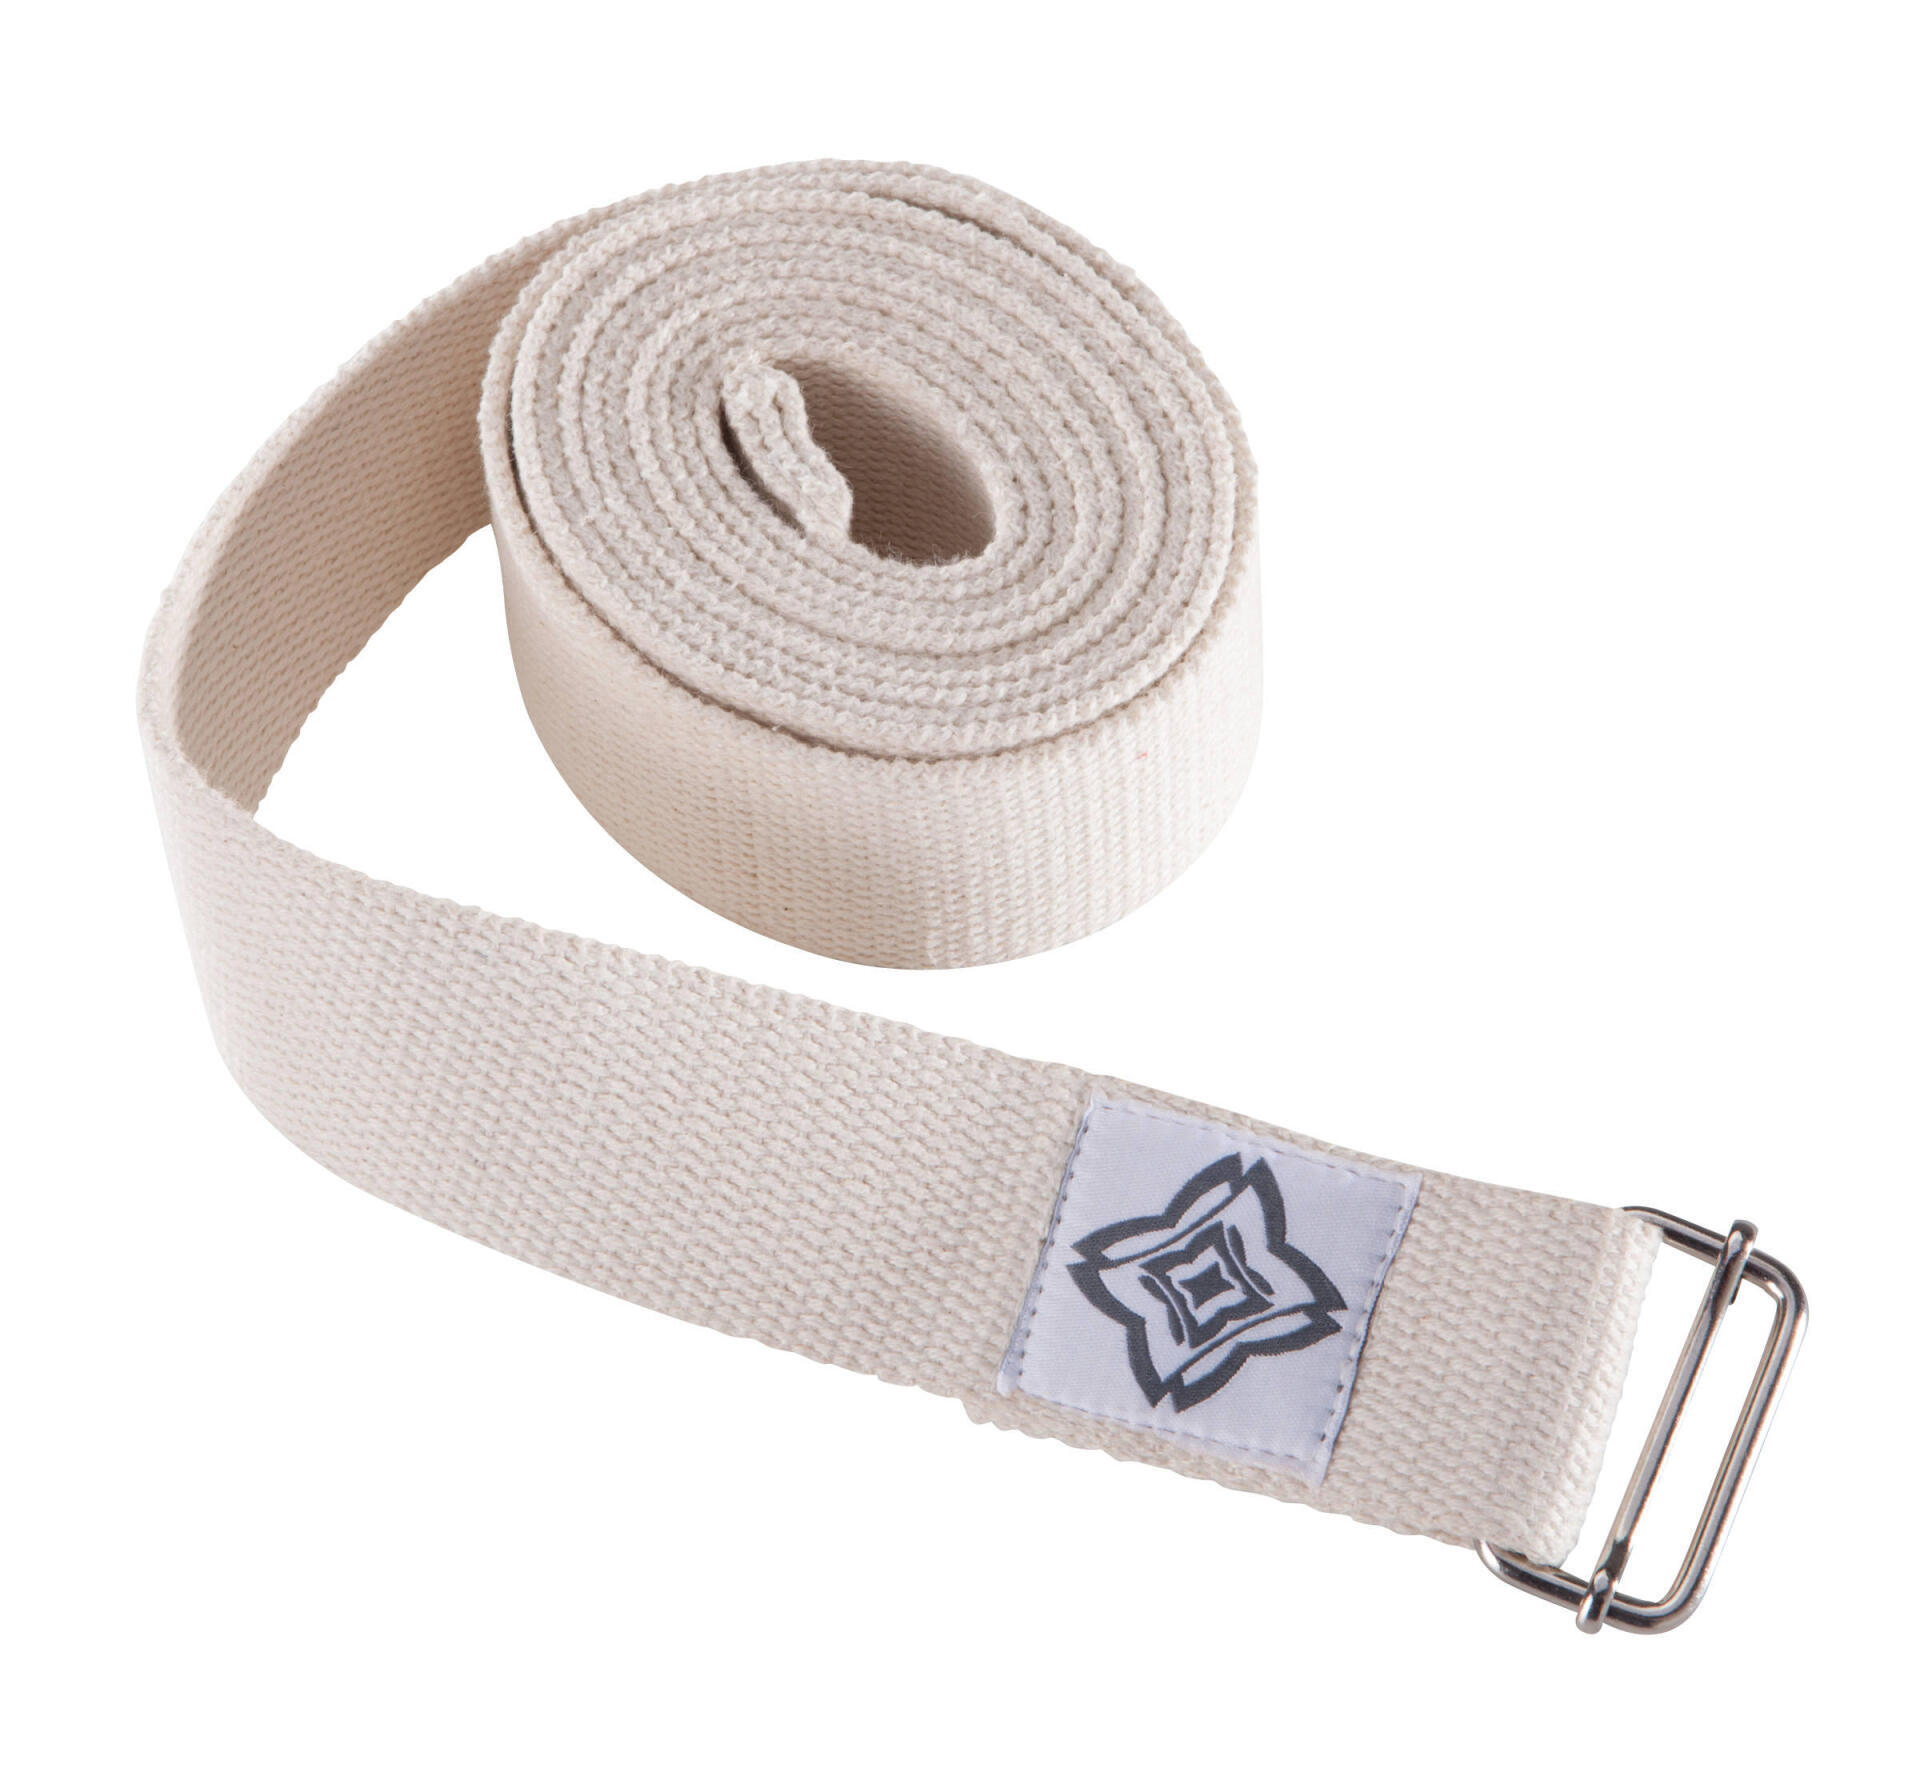 Yoga | Level up your yoga pose with: yoga strap